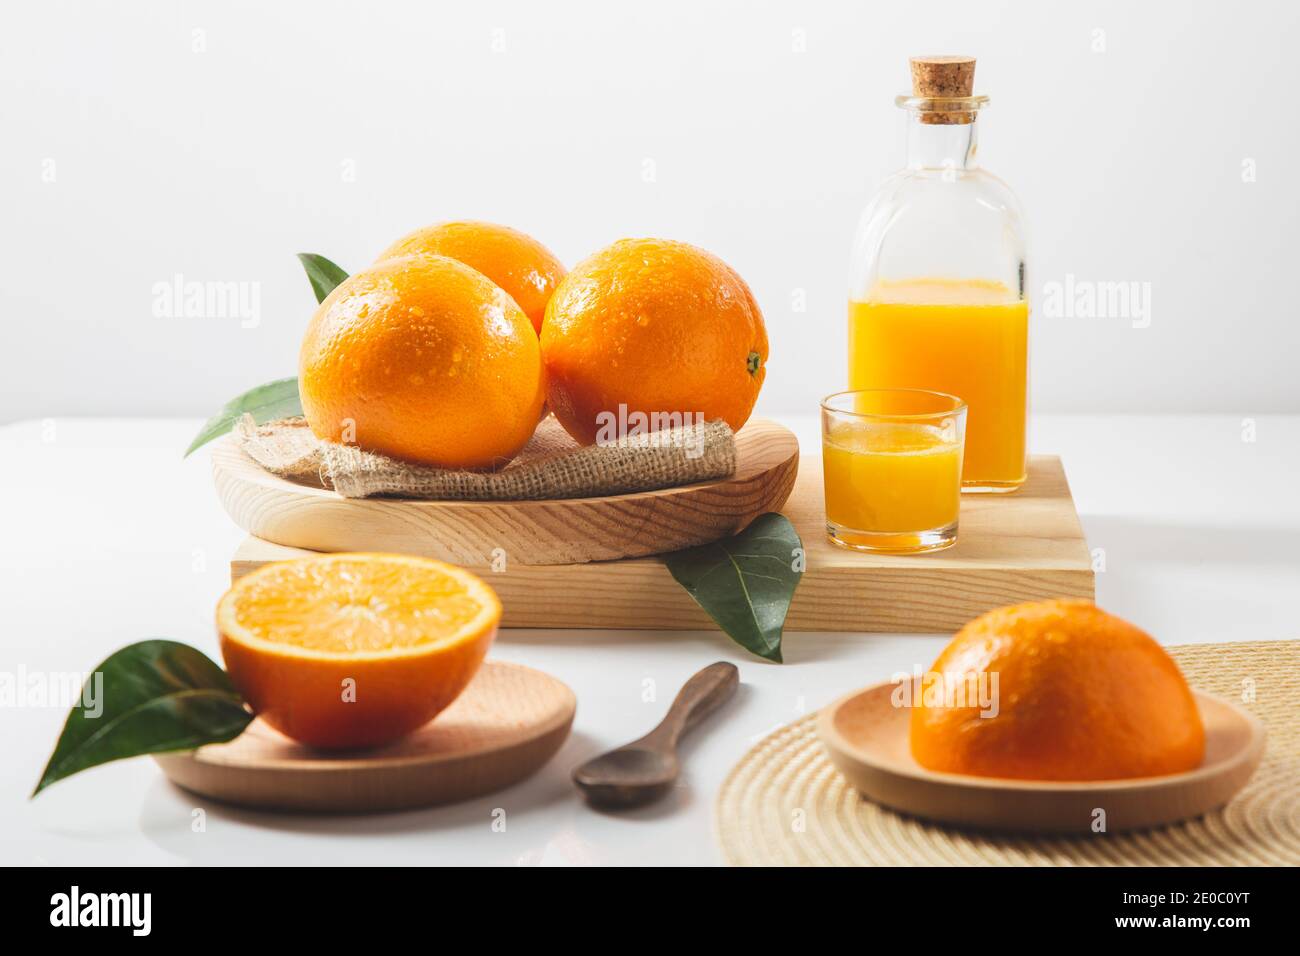 https://c8.alamy.com/comp/2E0C0YT/oranges-oranges-slices-orange-leaves-and-glass-containers-with-orange-juice-on-white-background-2E0C0YT.jpg